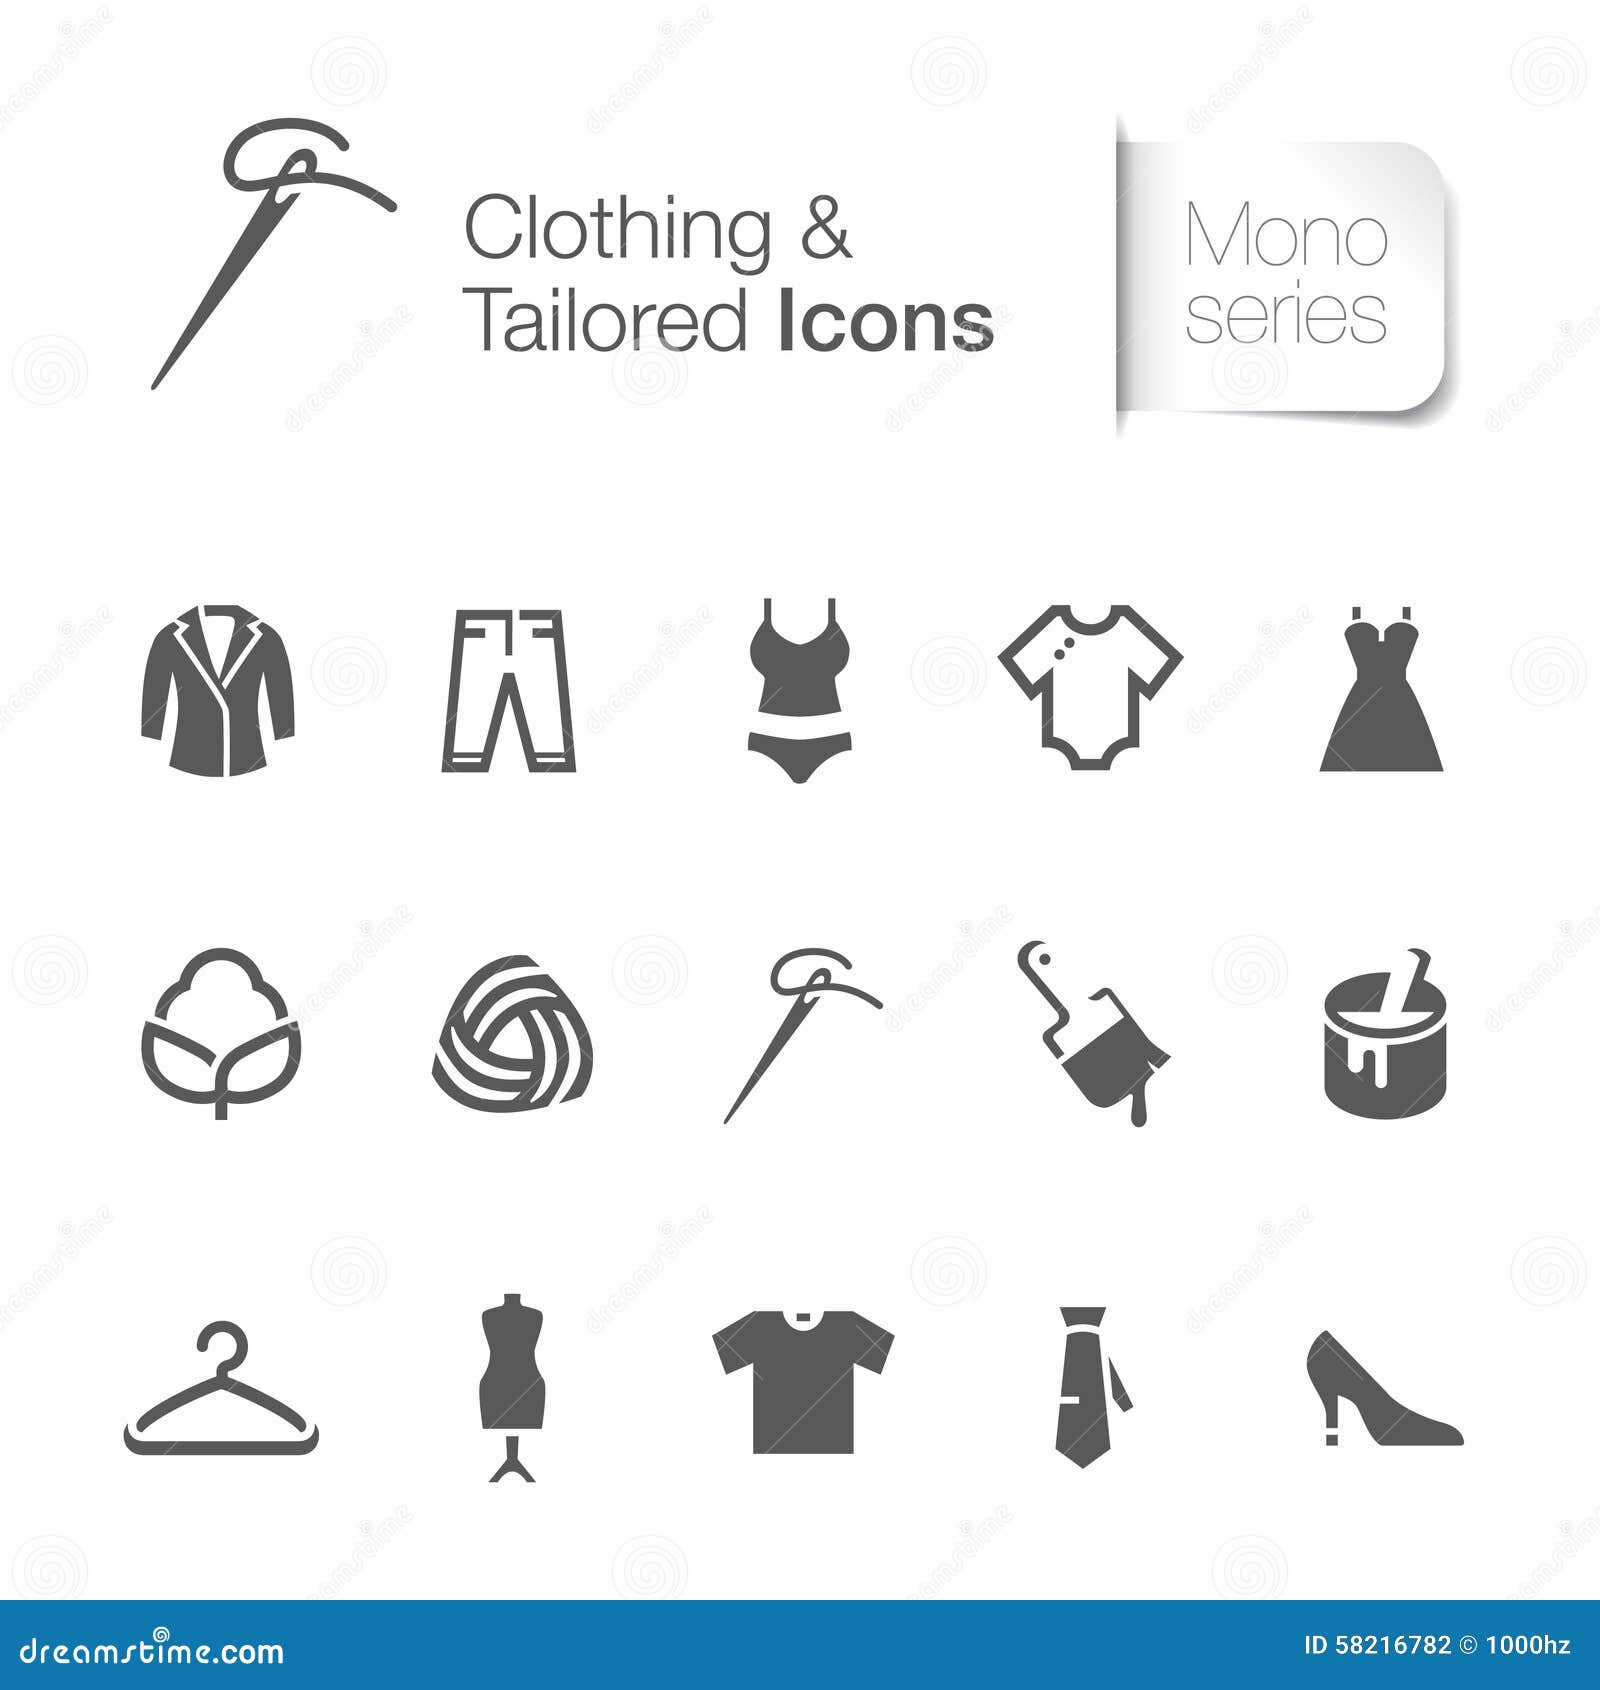 clothing & tailored related icons